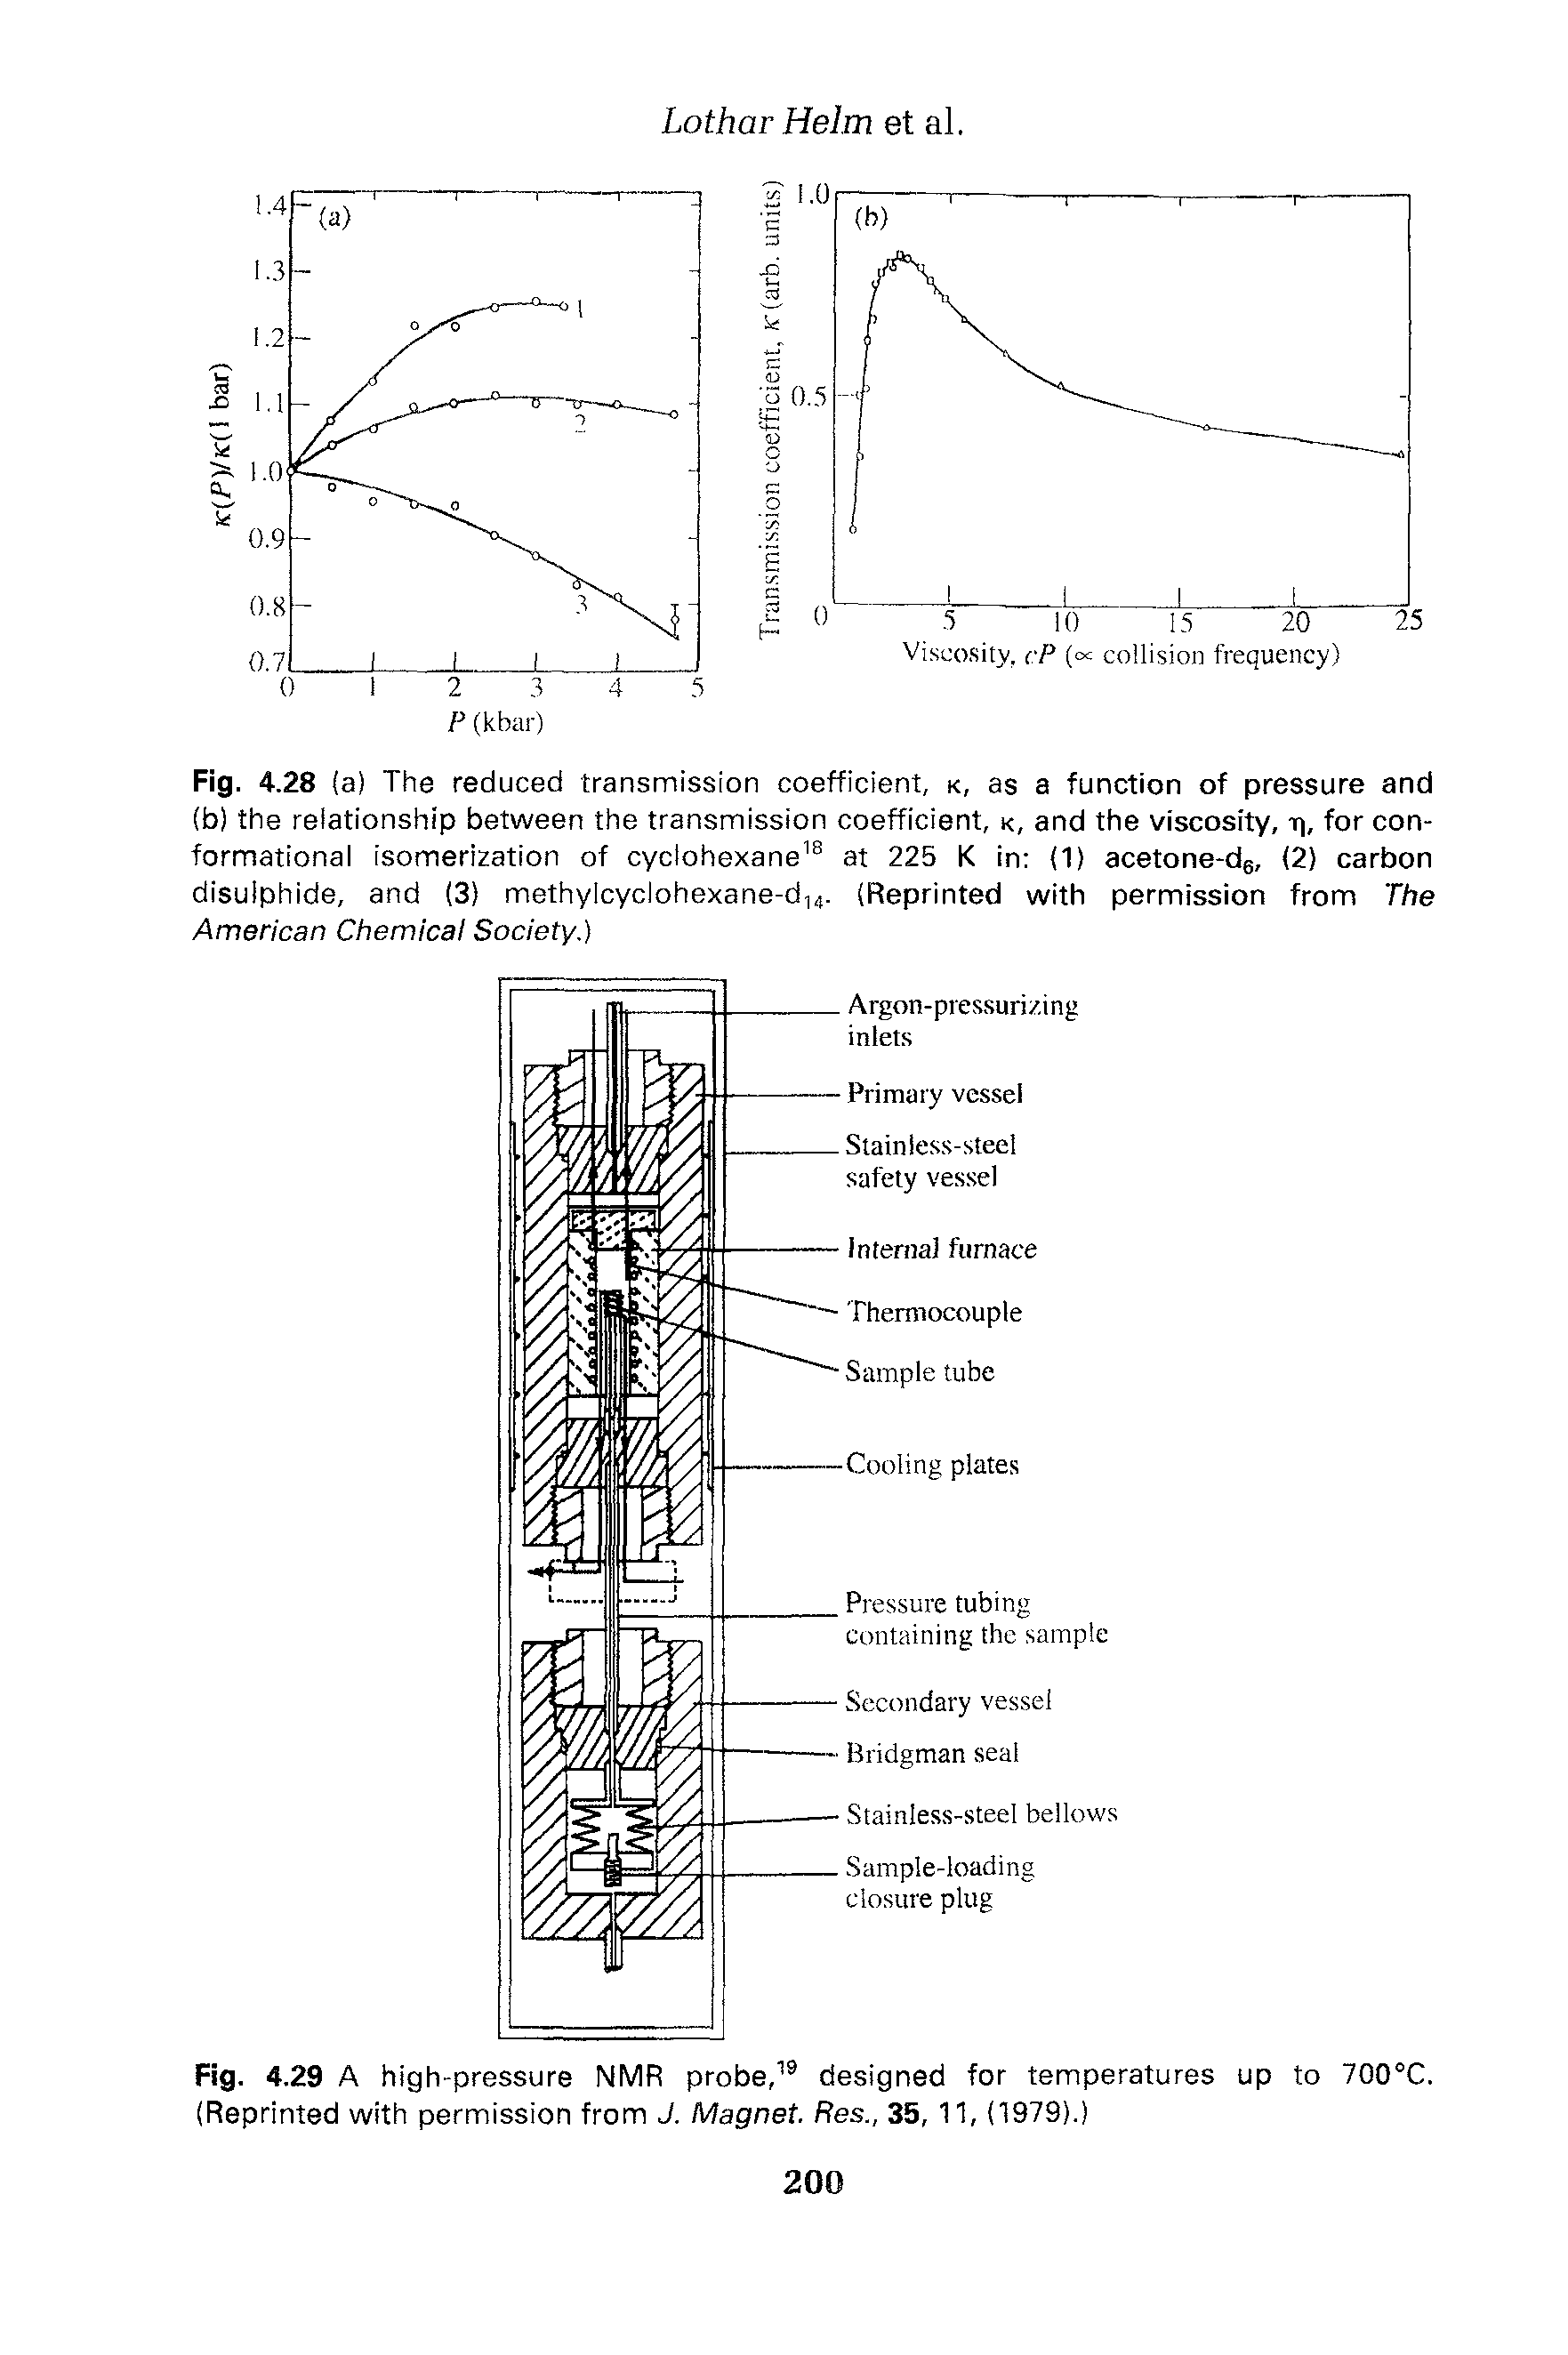 Fig. 4.29 A high-pressure NMR probe, designed for temperatures up to 700°C. (Reprinted with permission from J. Magnet. Res., 35, 11, (1979).)...